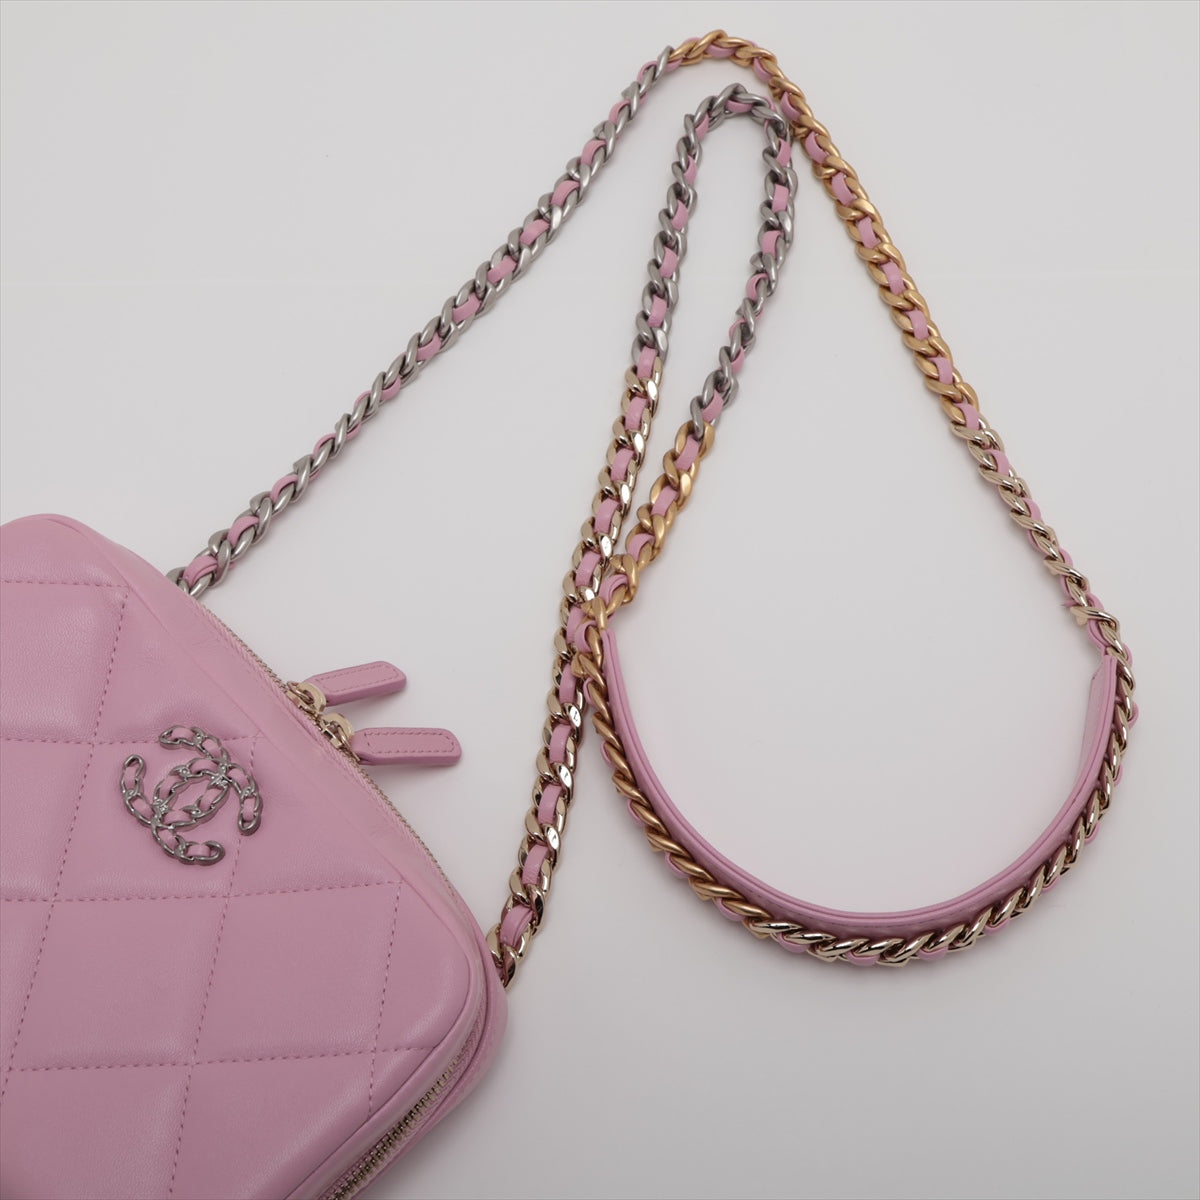 Chanel CHANEL 19 Lambskin Chain shoulder bag Pink Gold x silver metal fittings 32 series AP2728